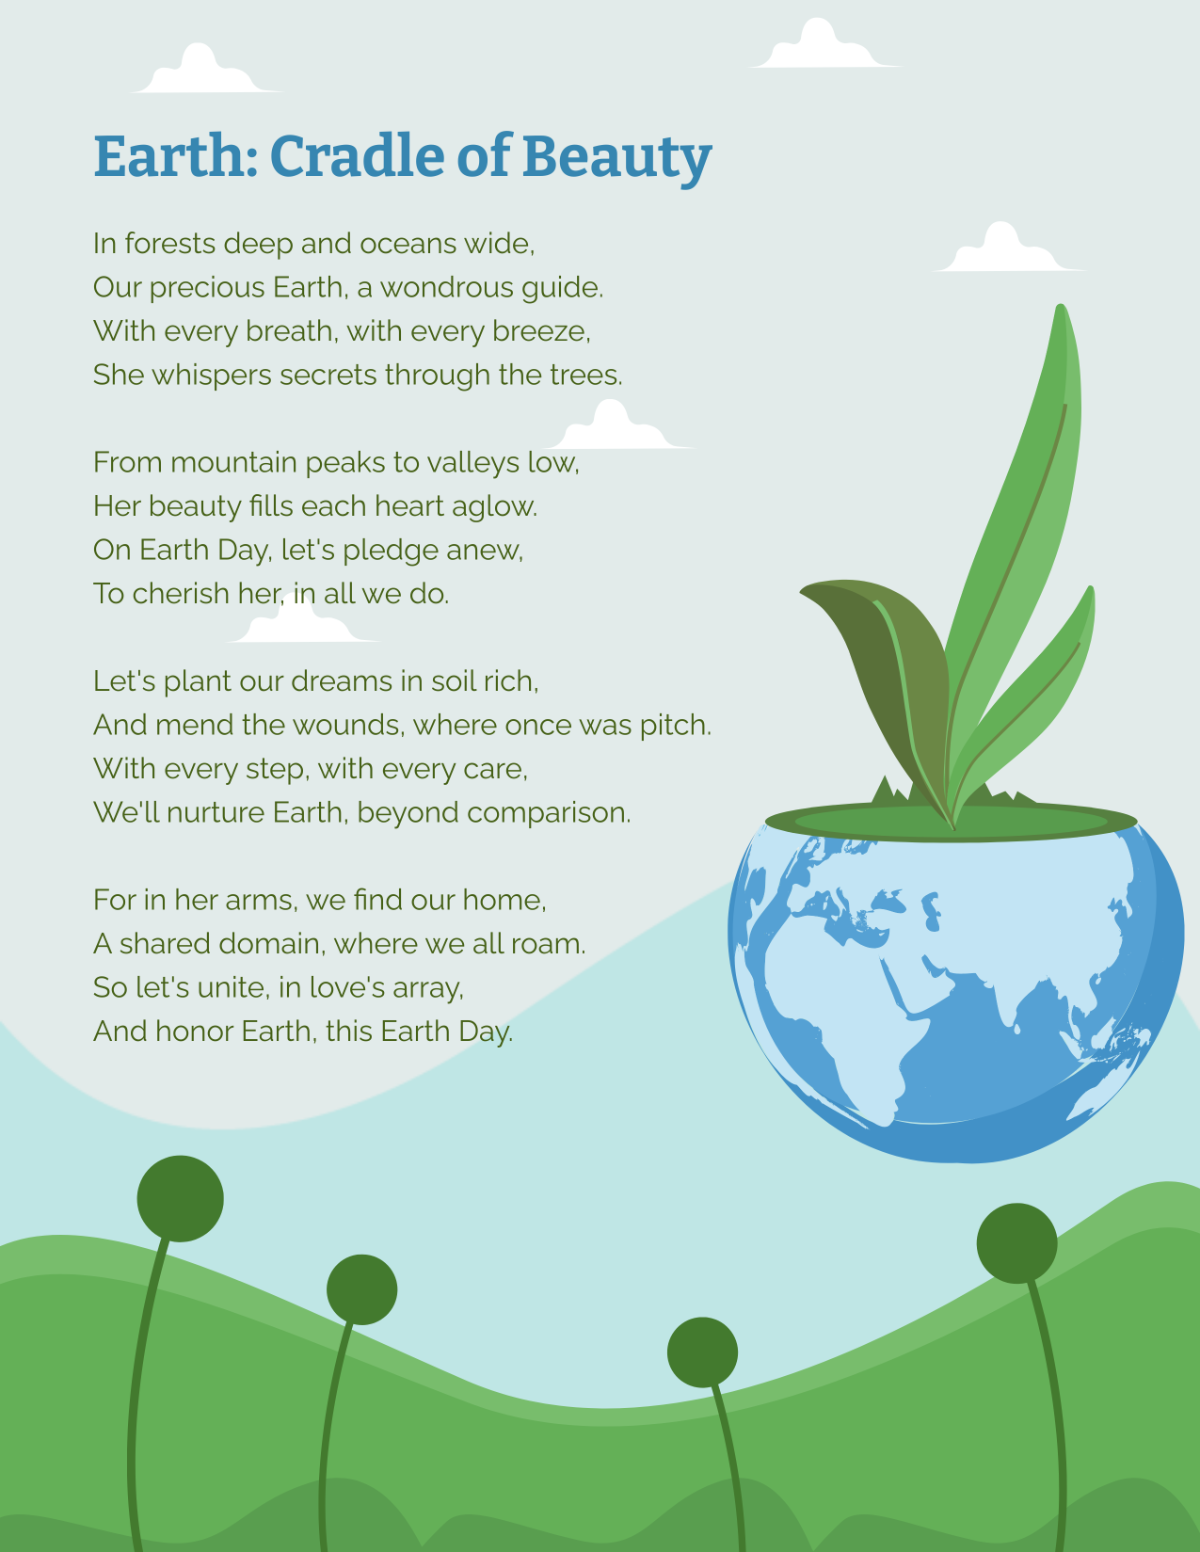 Earth Day Poem